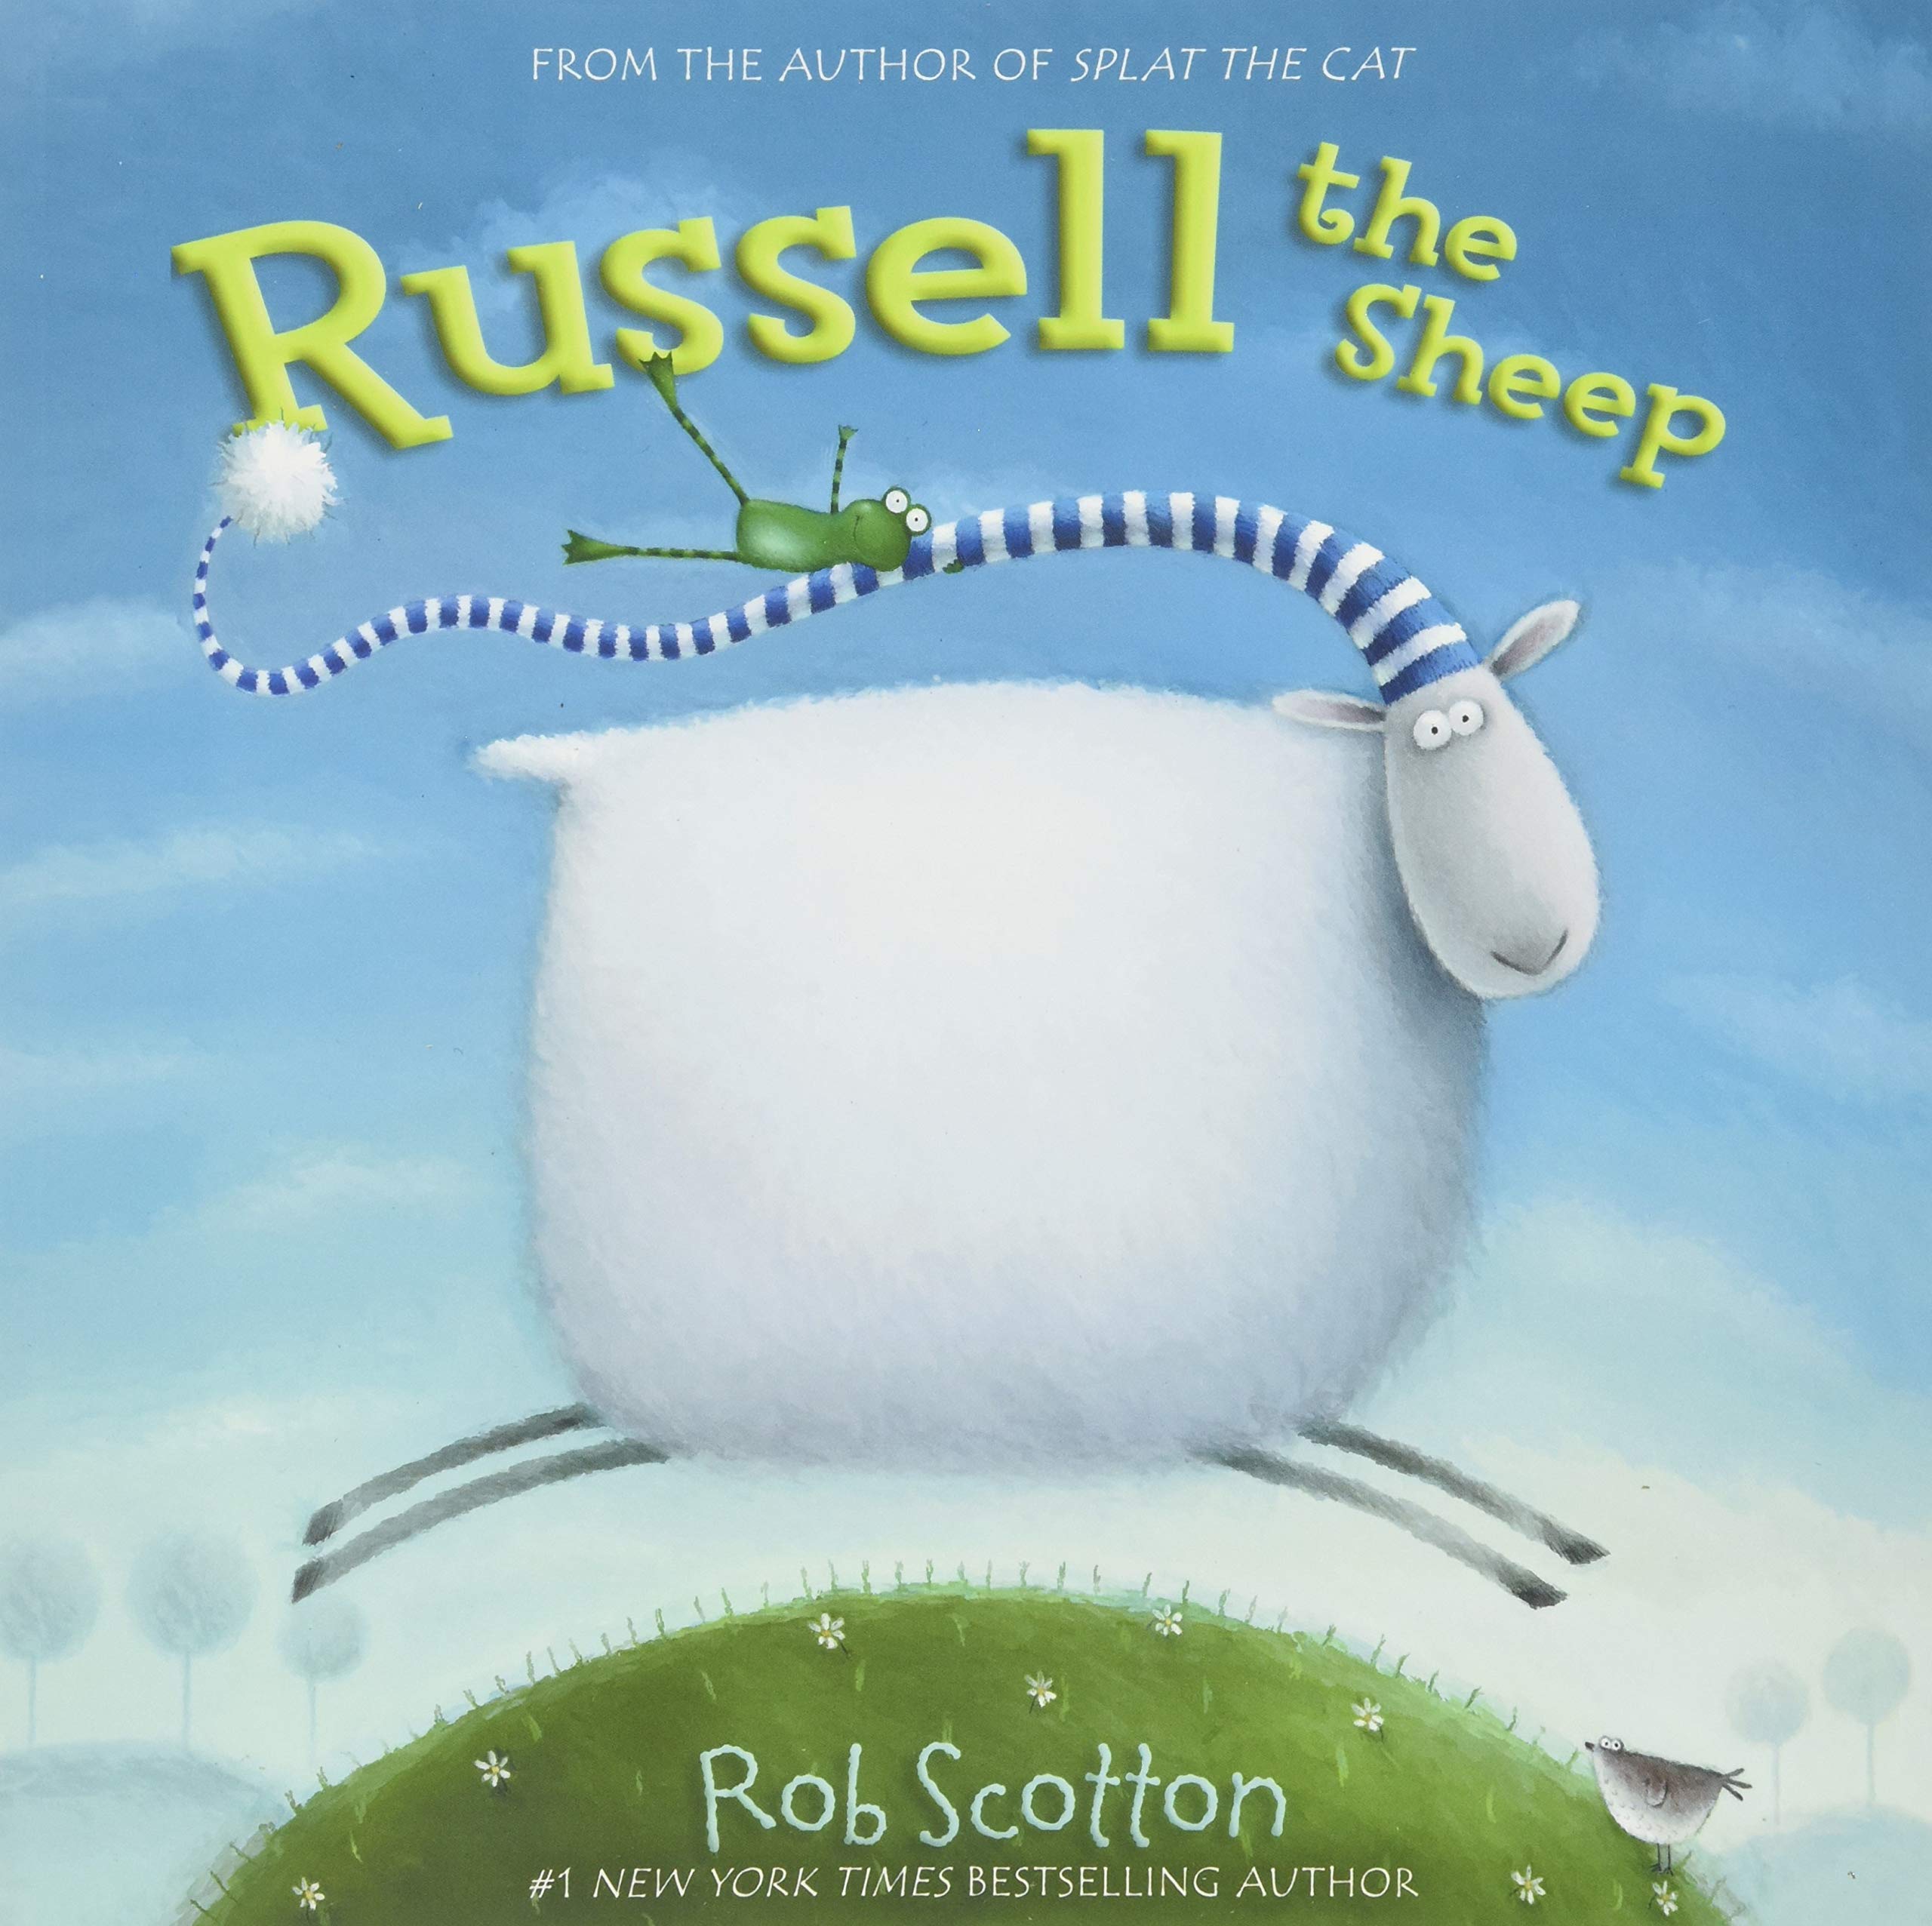 IMG : Russell the Sheep